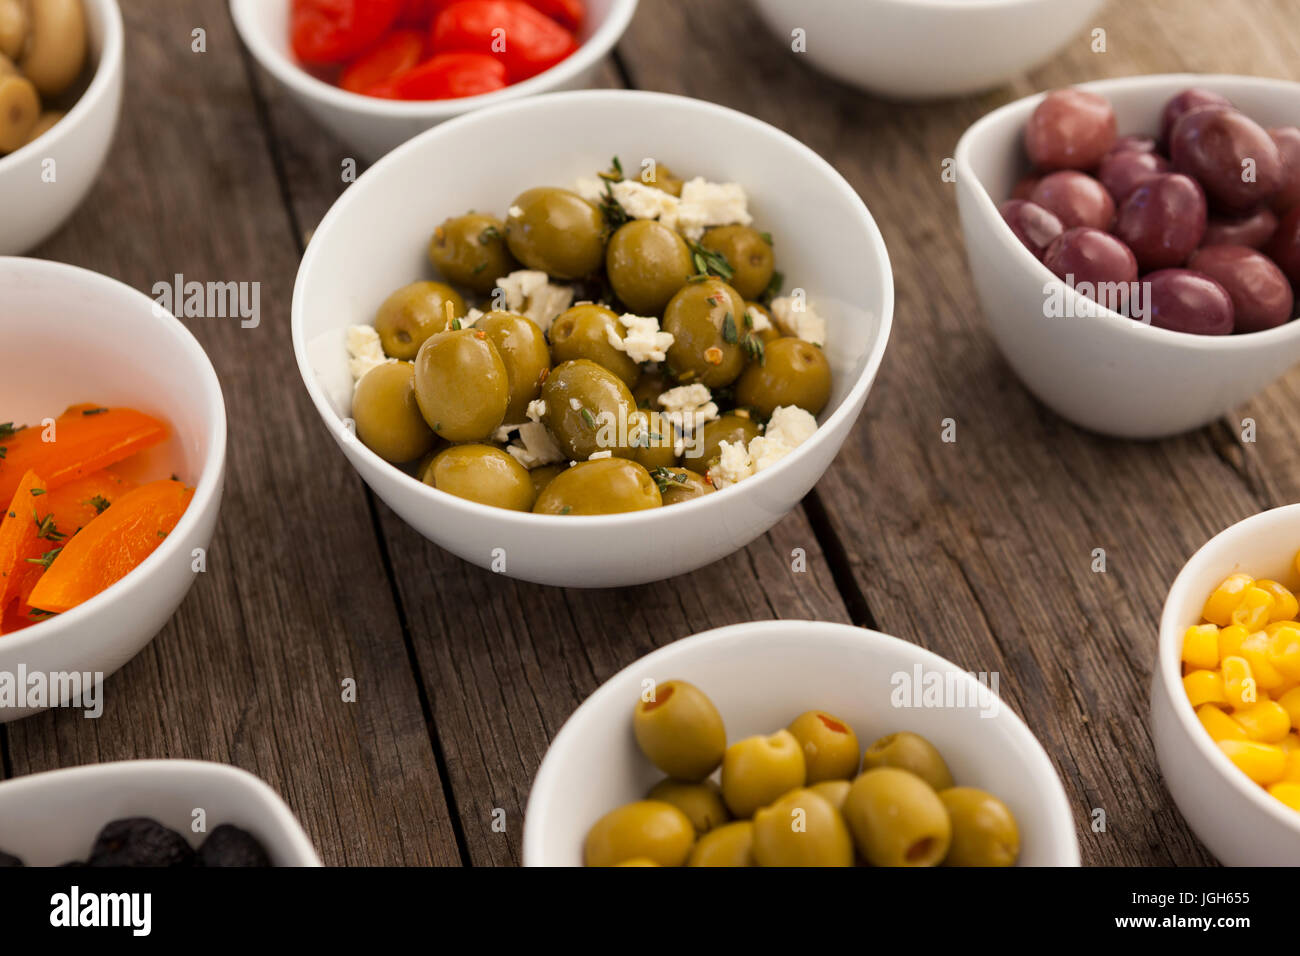 Various olives and ingredients in bowls on table Stock Photo